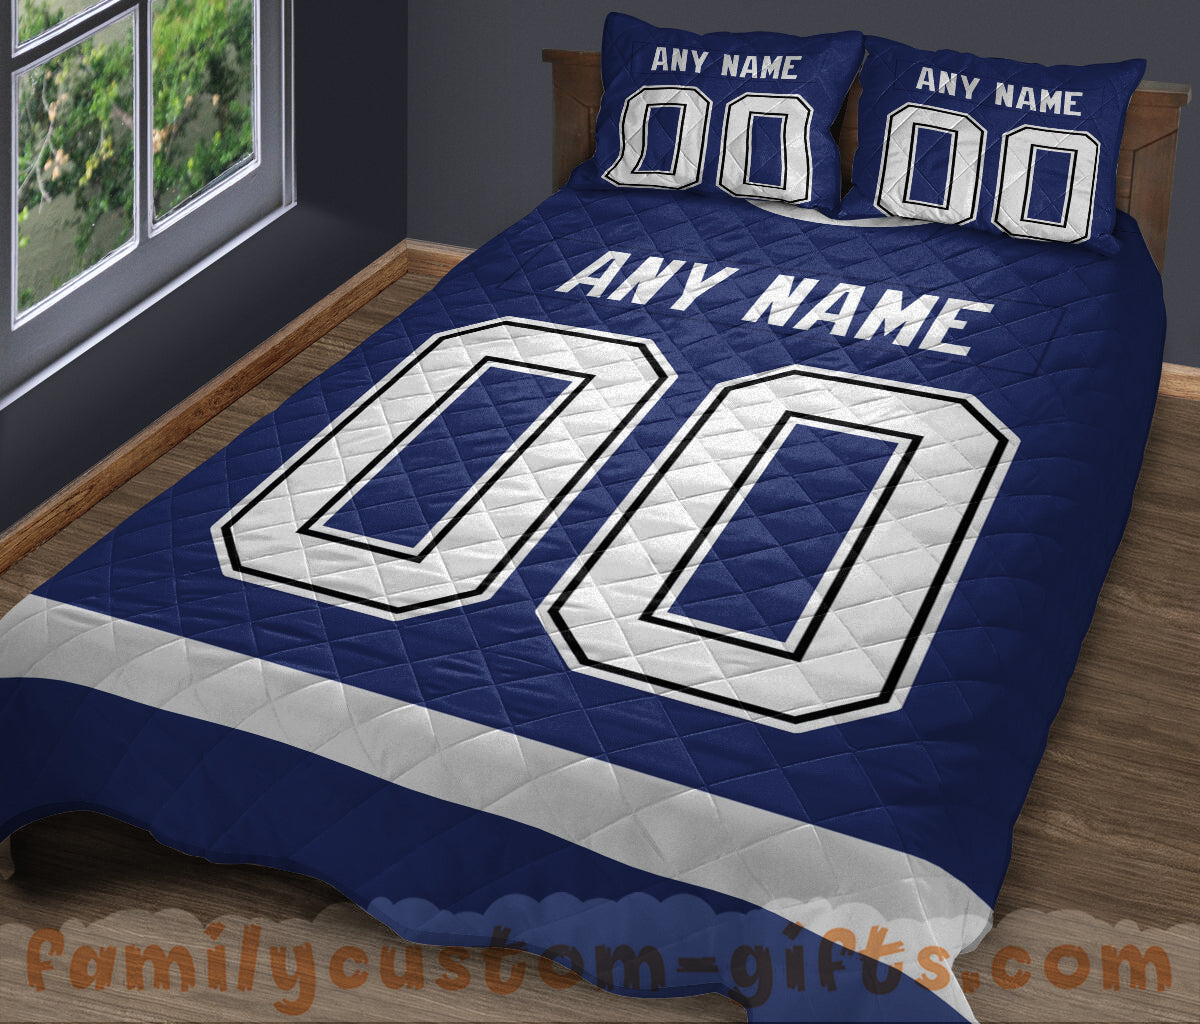 Custom Quilt Sets Tampa Bay Jersey Personalized Ice hockey Premium Quilt Bedding for Men Women